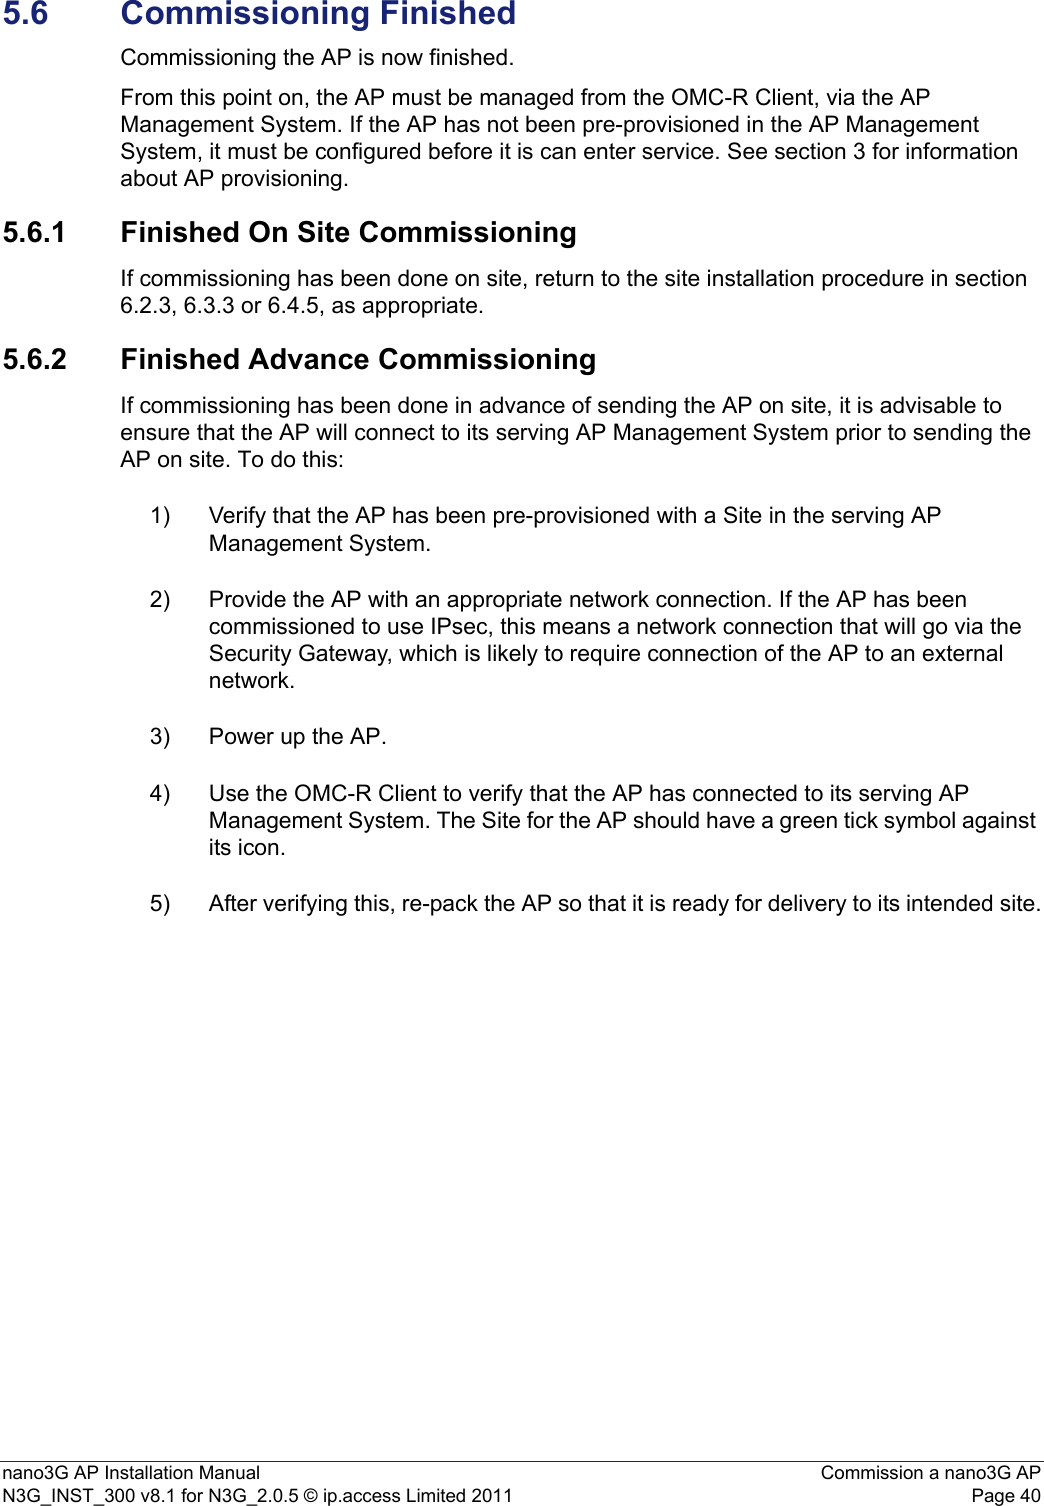 nano3G AP Installation Manual Commission a nano3G APN3G_INST_300 v8.1 for N3G_2.0.5 © ip.access Limited 2011 Page 405.6 Commissioning FinishedCommissioning the AP is now finished. From this point on, the AP must be managed from the OMC-R Client, via the AP Management System. If the AP has not been pre-provisioned in the AP Management System, it must be configured before it is can enter service. See section 3 for information about AP provisioning.5.6.1 Finished On Site CommissioningIf commissioning has been done on site, return to the site installation procedure in section 6.2.3, 6.3.3 or 6.4.5, as appropriate. 5.6.2 Finished Advance CommissioningIf commissioning has been done in advance of sending the AP on site, it is advisable to ensure that the AP will connect to its serving AP Management System prior to sending the AP on site. To do this:1) Verify that the AP has been pre-provisioned with a Site in the serving AP Management System. 2) Provide the AP with an appropriate network connection. If the AP has been commissioned to use IPsec, this means a network connection that will go via the Security Gateway, which is likely to require connection of the AP to an external network. 3) Power up the AP. 4) Use the OMC-R Client to verify that the AP has connected to its serving AP Management System. The Site for the AP should have a green tick symbol against its icon. 5) After verifying this, re-pack the AP so that it is ready for delivery to its intended site.